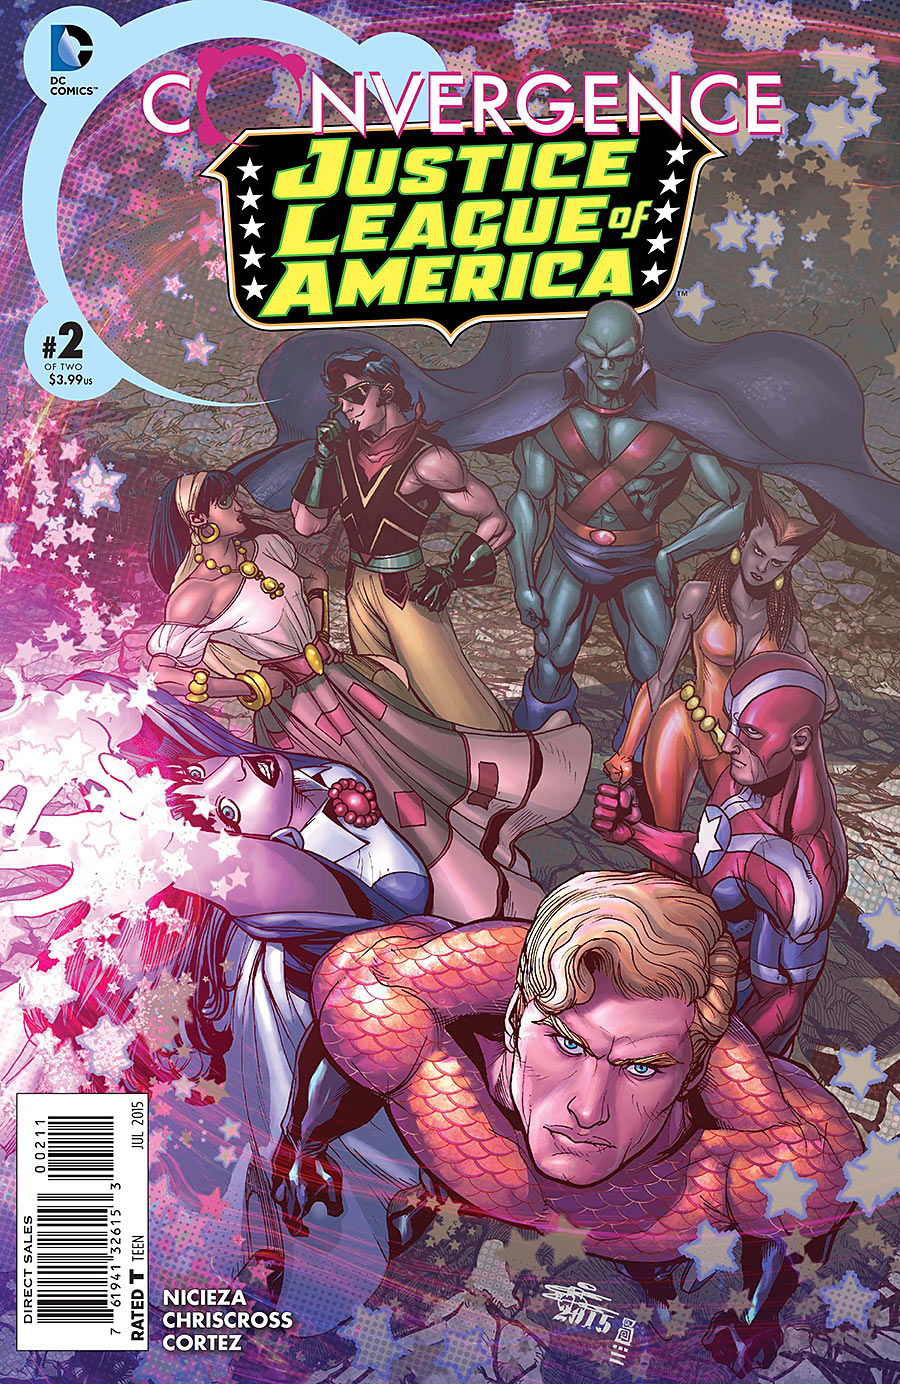 Convergence: Justice League of America Vol. 1 #2